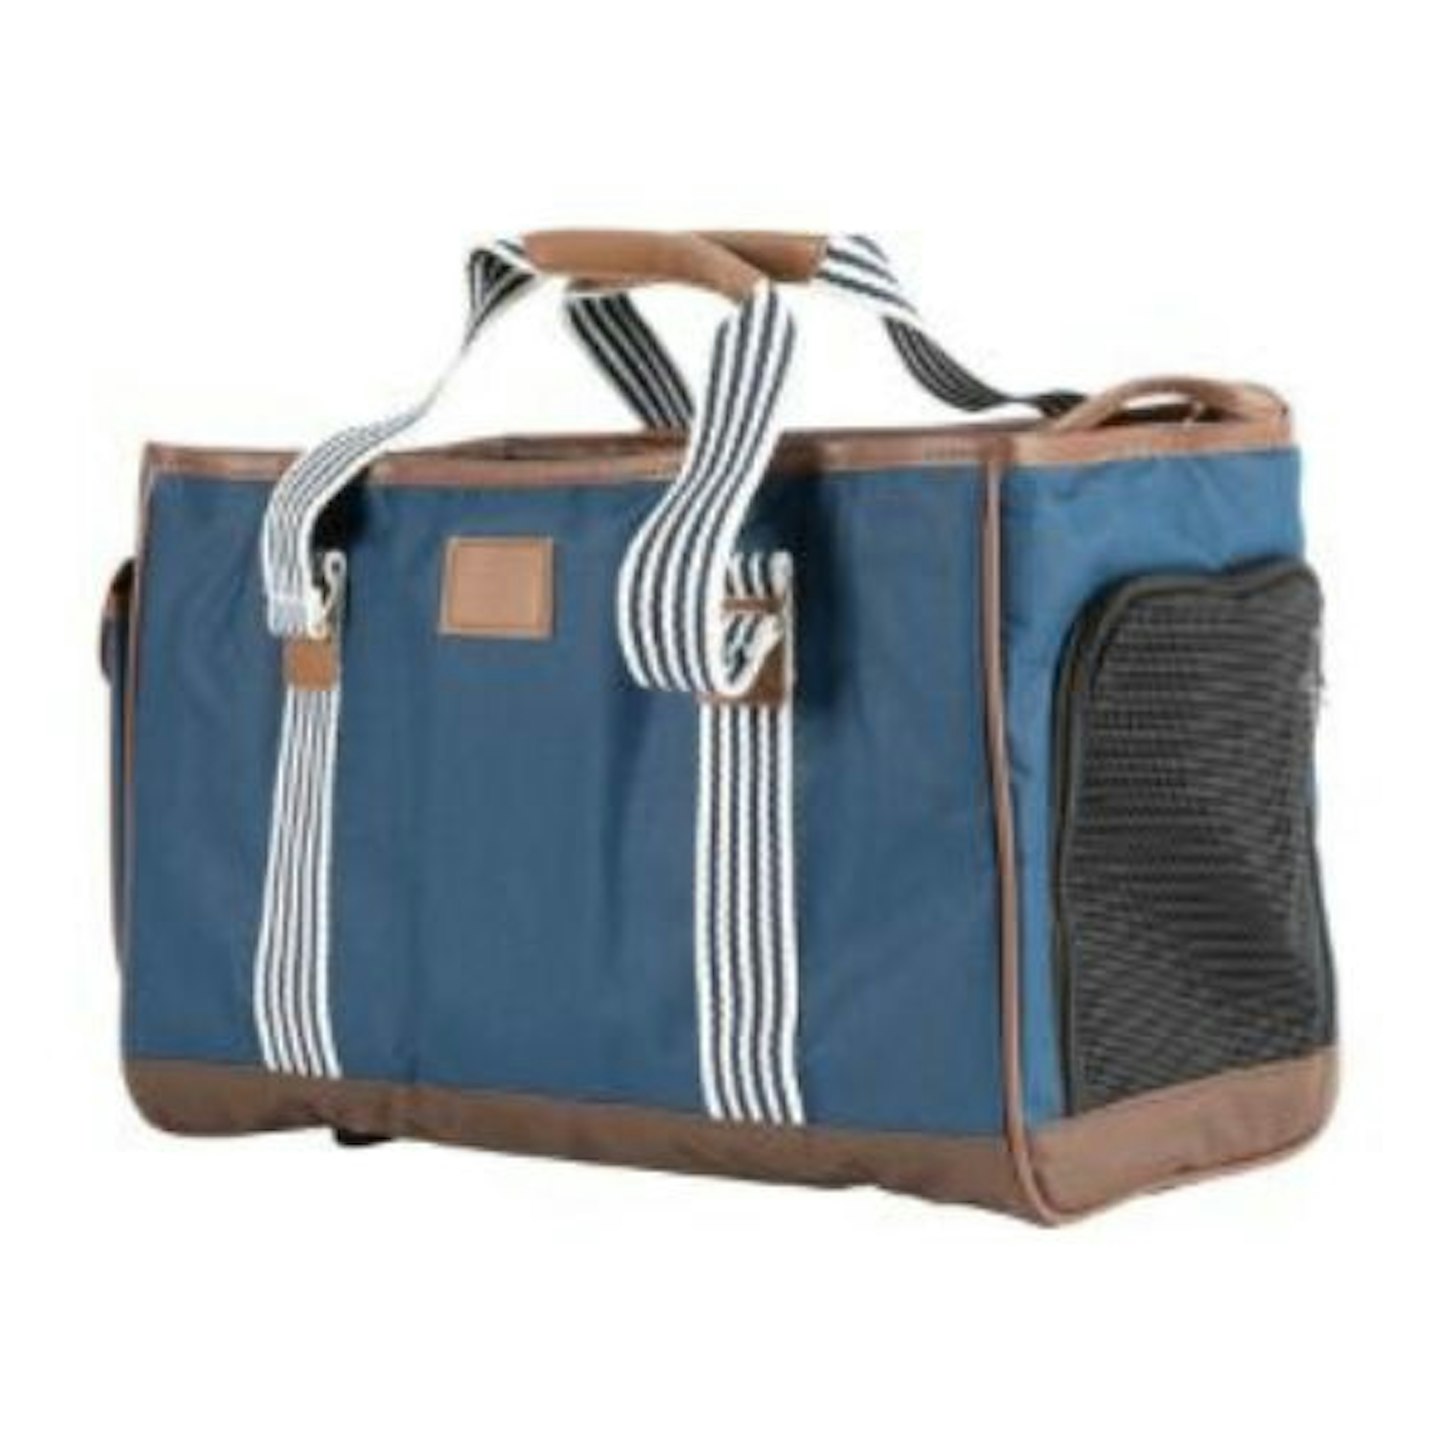 Pets at Home Navy Pet Carrier with Pockets